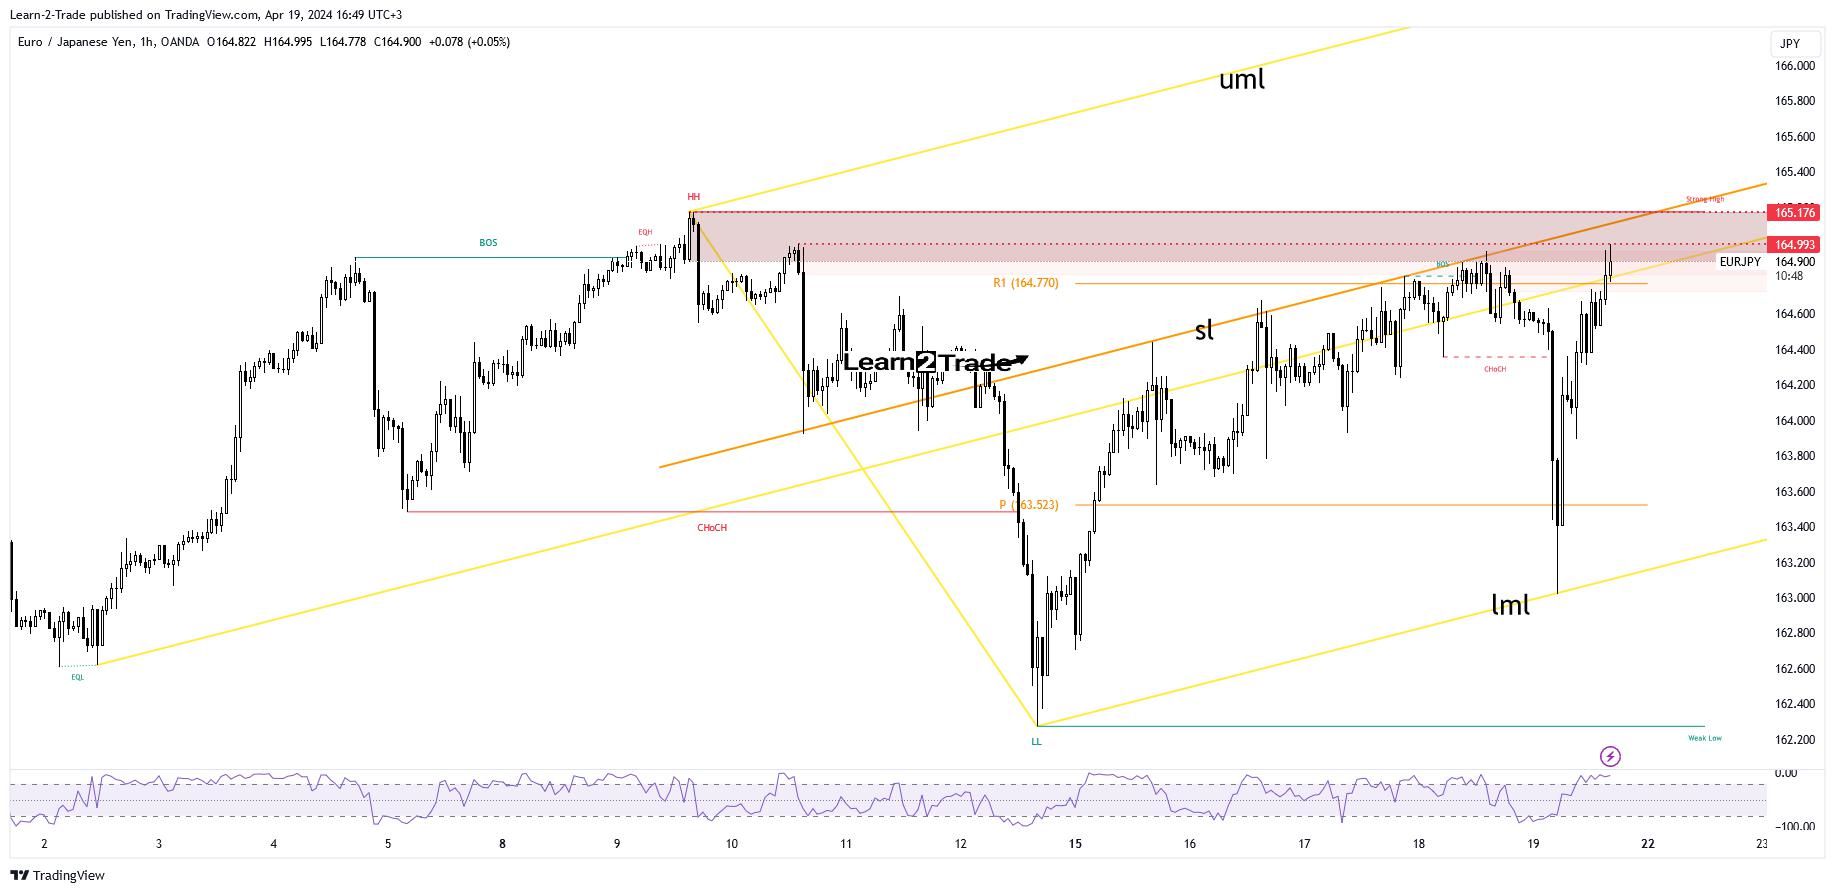 EUR/JPY in a supply zone again [Video]